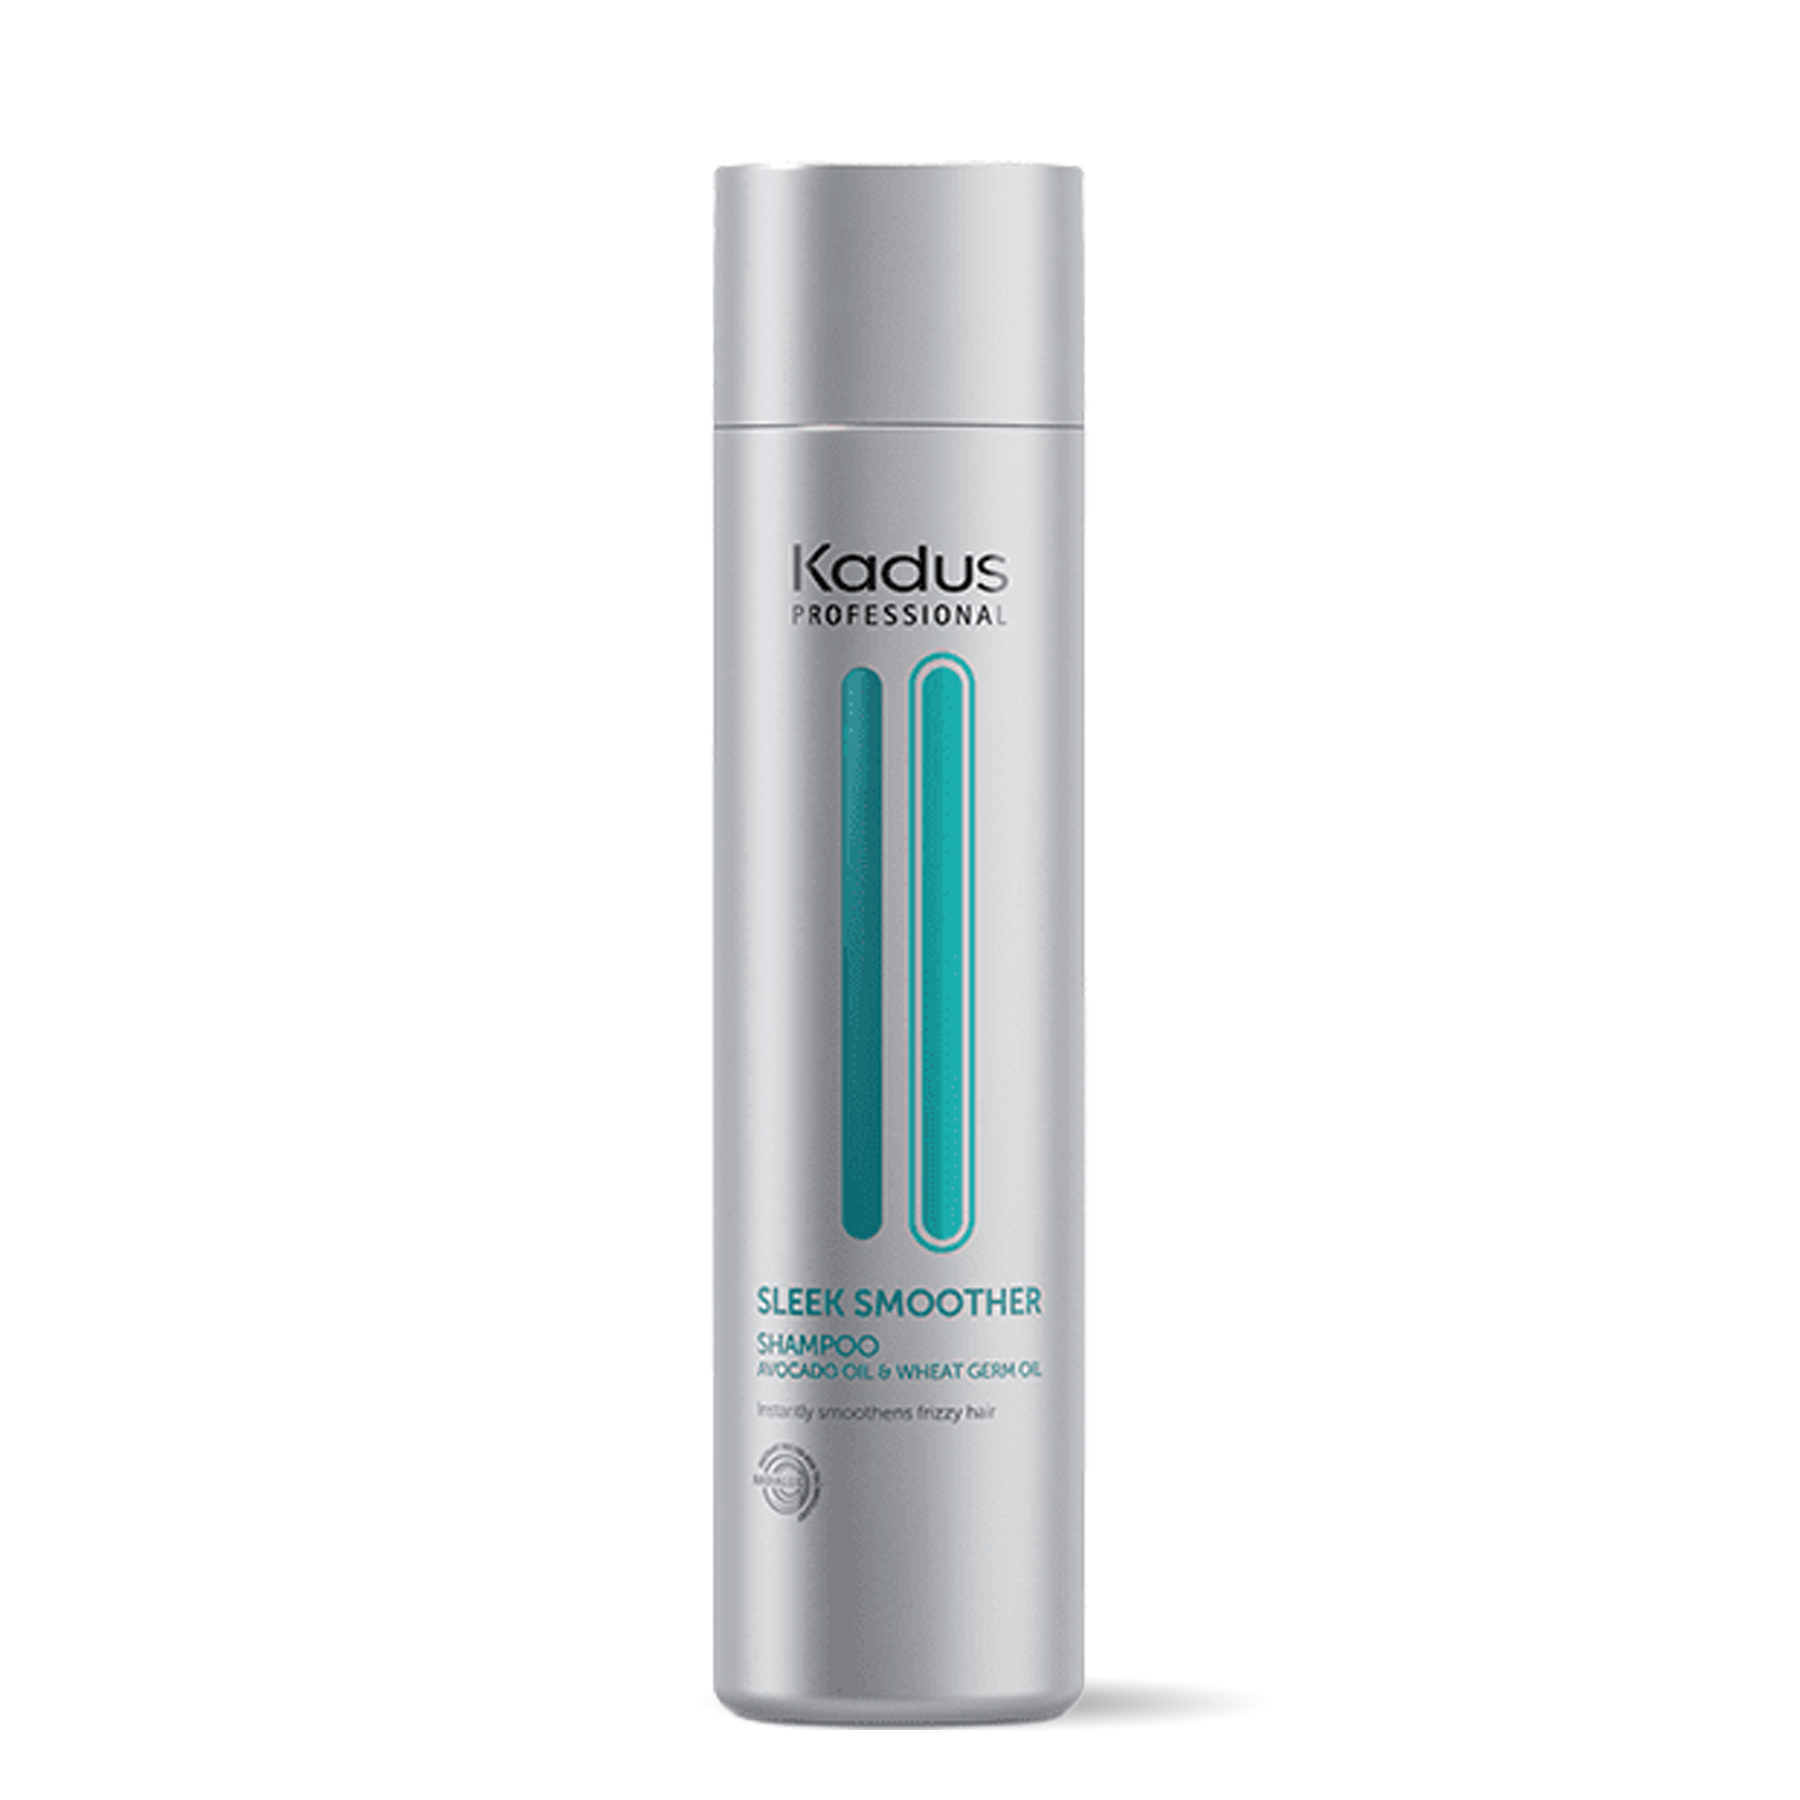 Kadus Sleek Smoother Shampoo 250ml - by Kadus Professionals |ProCare Outlet|